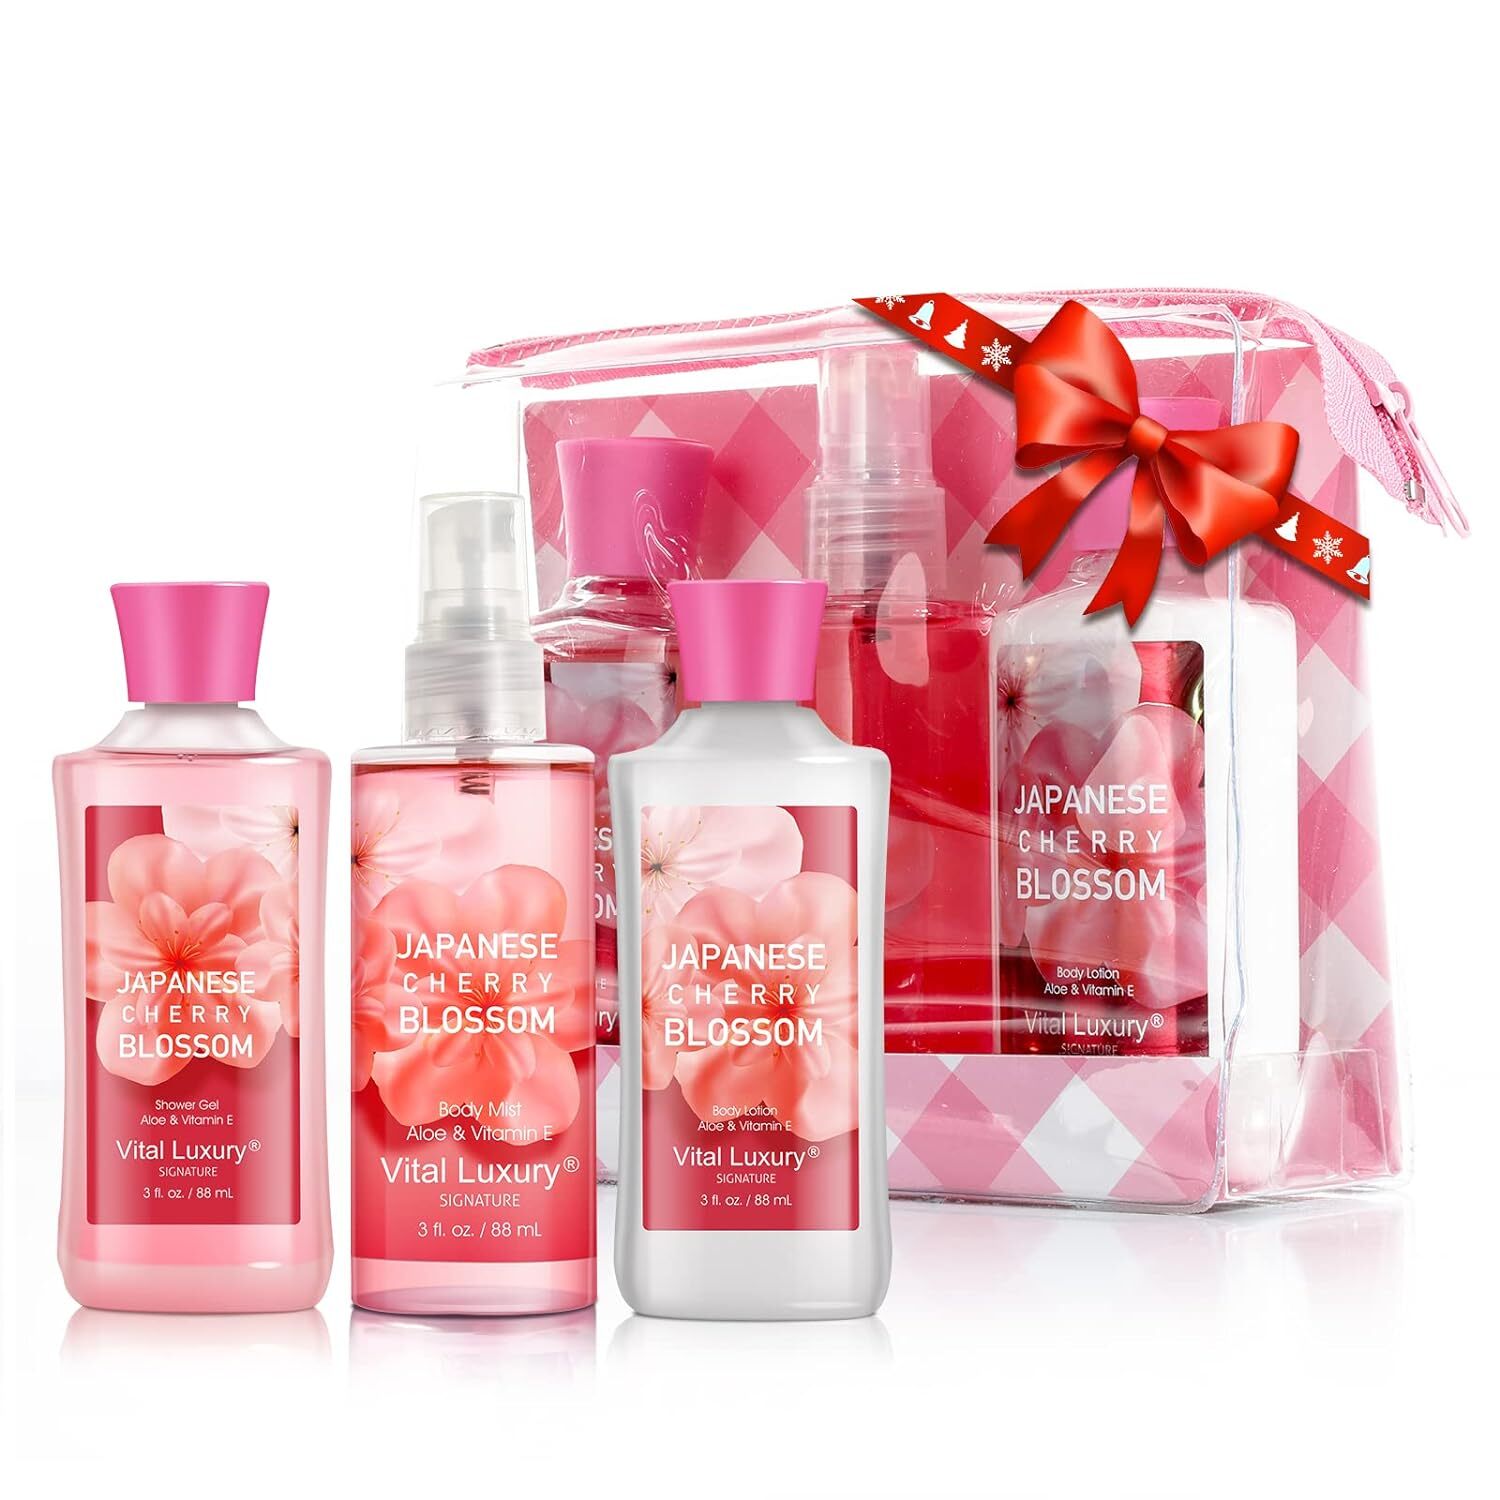 Vital Luxury Bath & Body Care Travel Set - Home Spa Set with Body Lotion, Shower Gel and Fragrance Mist, Valentines Day Gifts for Her and Him(Japanese Cherry Blossom)